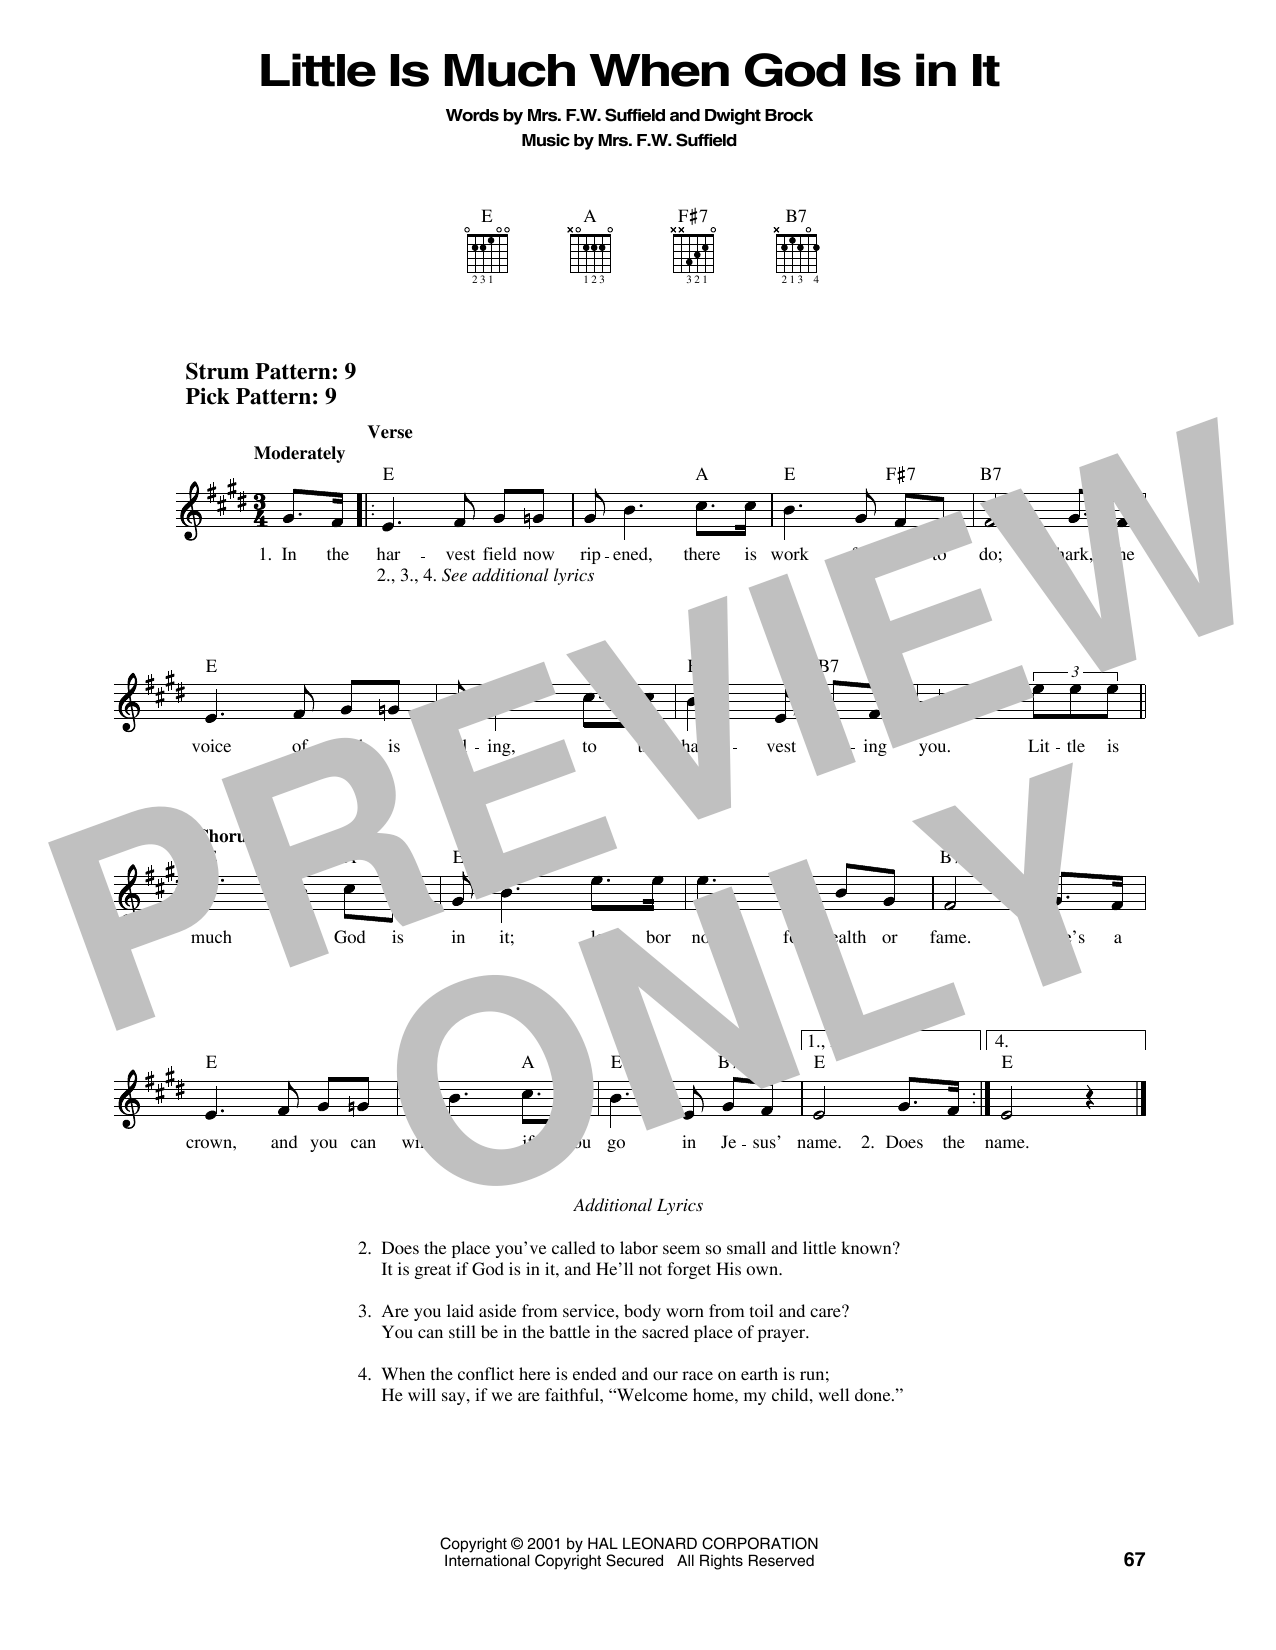 Dwight Brock Little Is Much When God Is In It sheet music notes printable PDF score